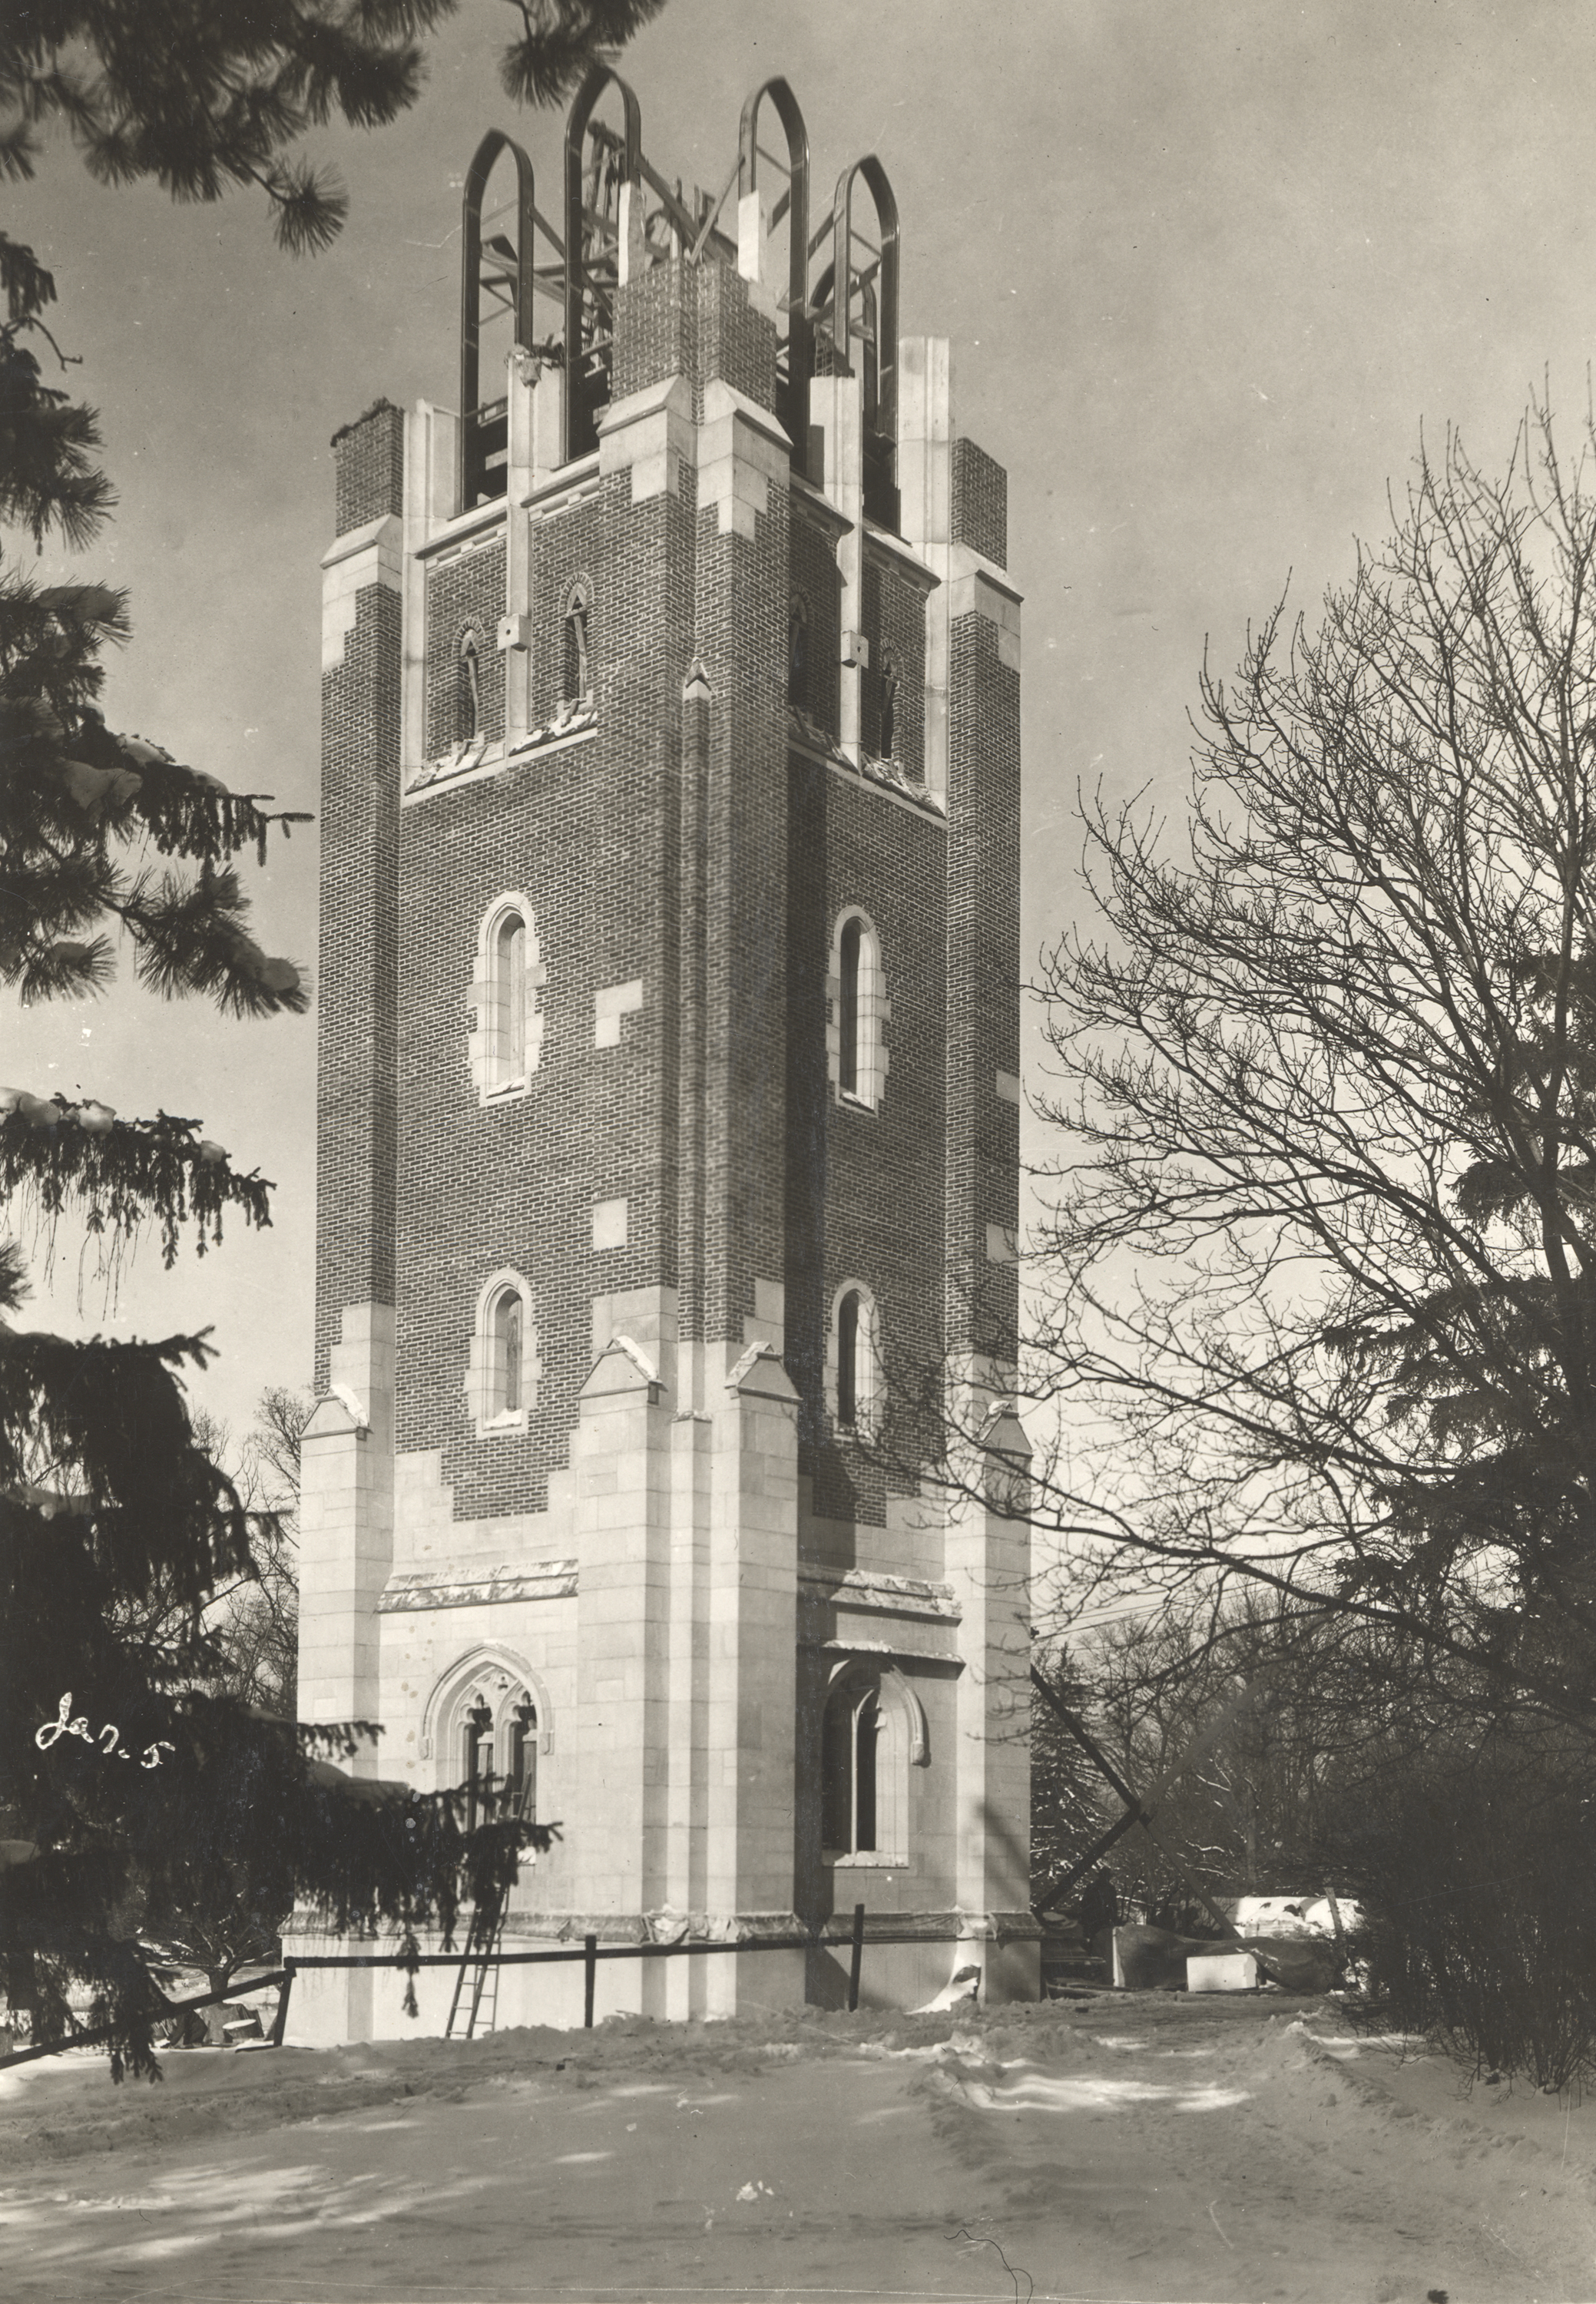 Beaumont Tower being constructed, 1929